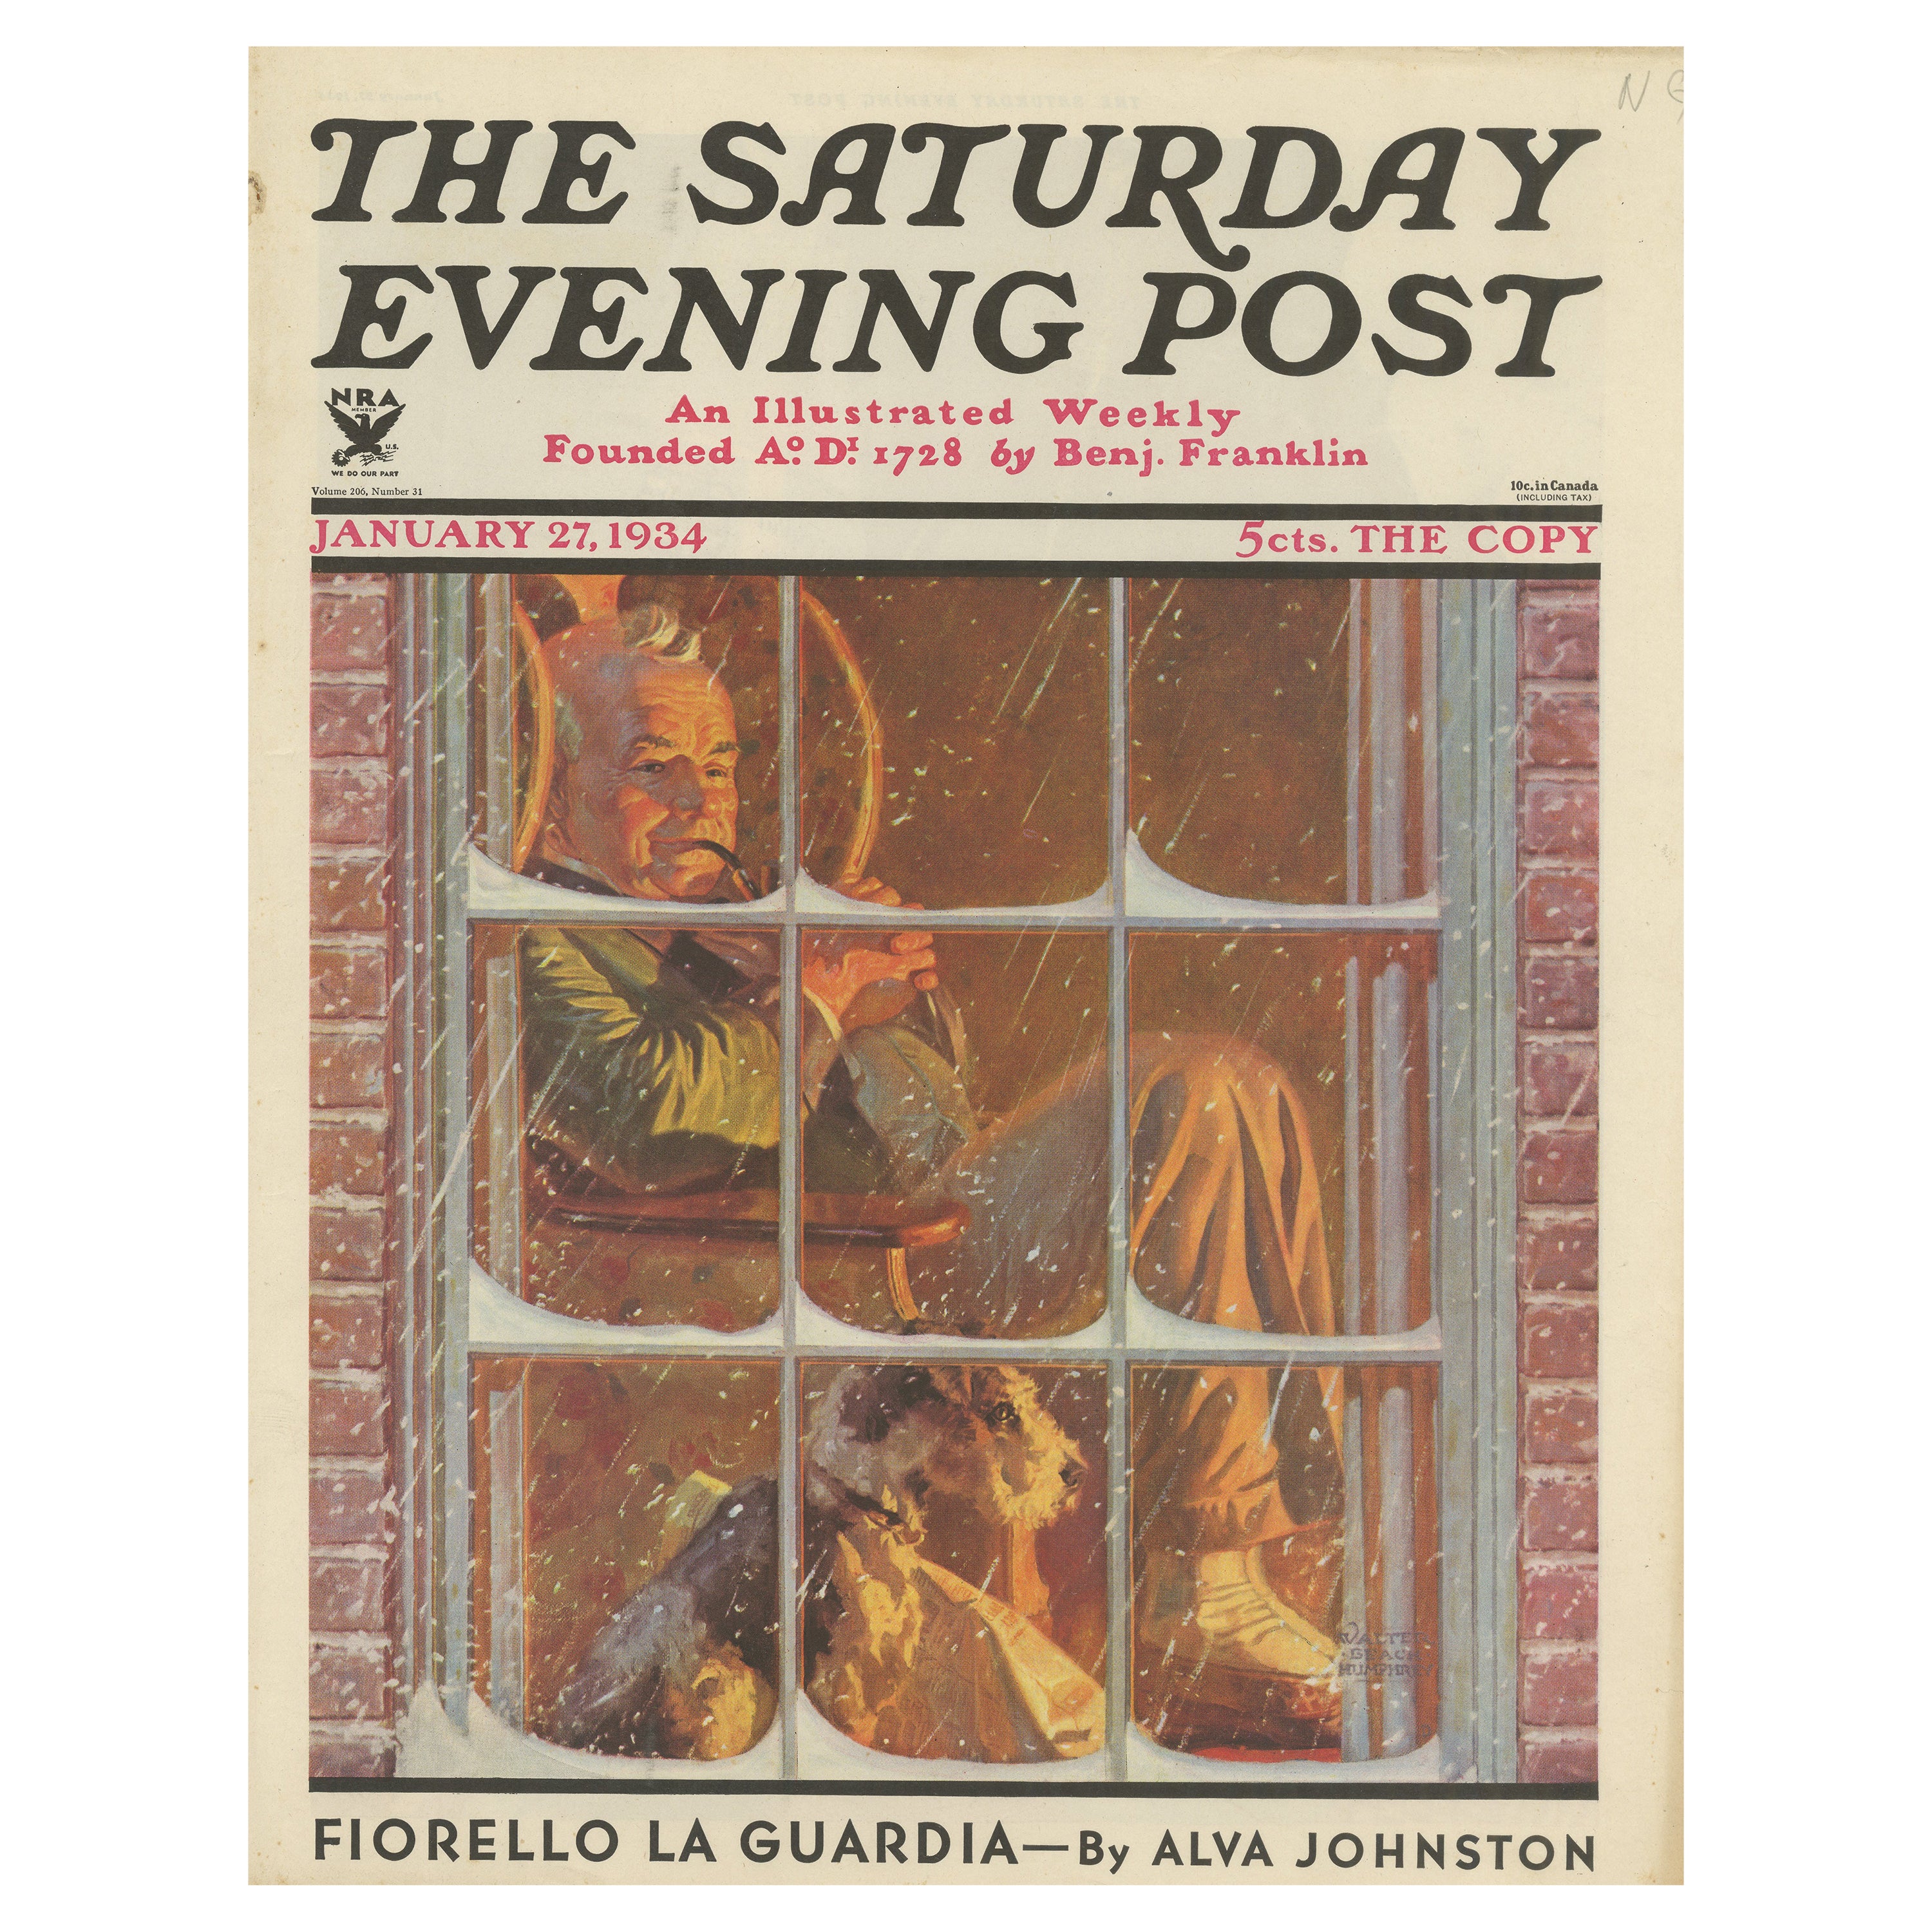 Vintage Print of a Man and Dog Sitting by the Fire 'The Saturday Evening Post' For Sale